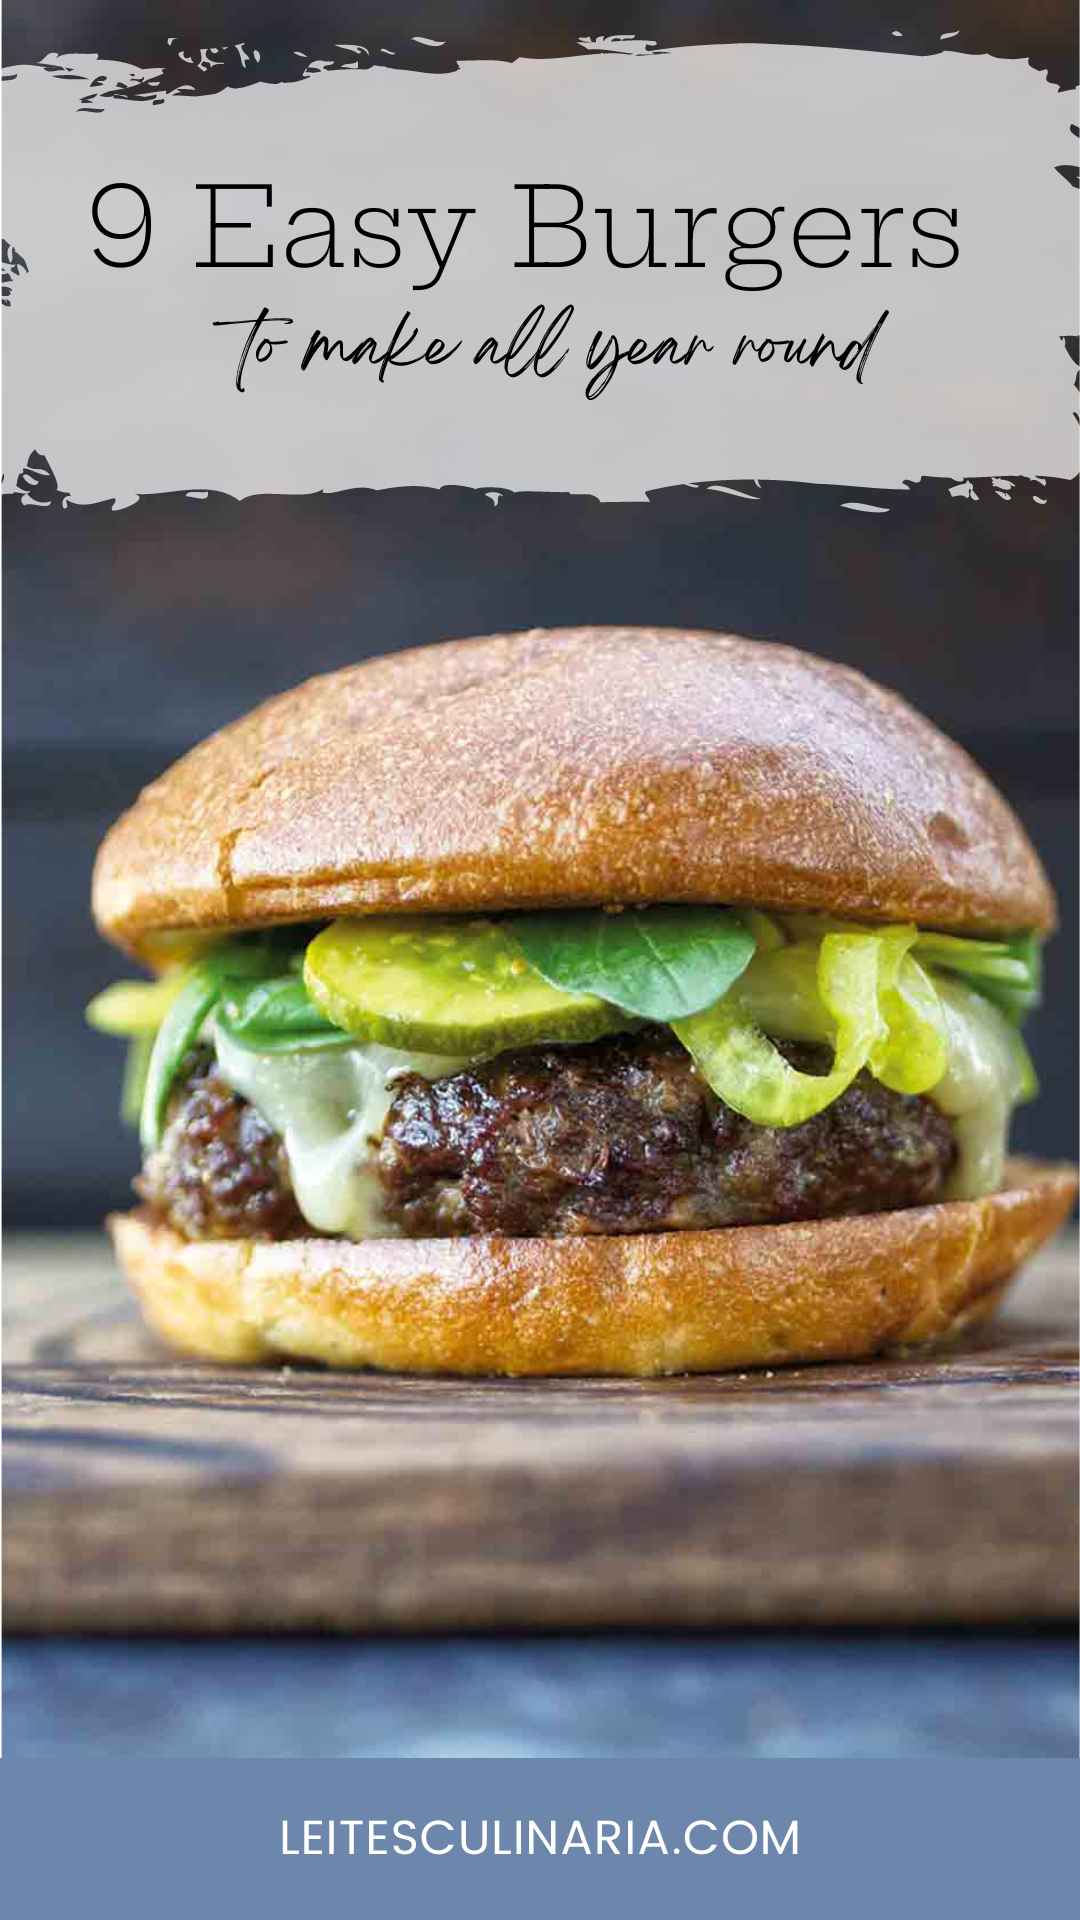 A burger topped with cheese, spinach, and pickles.